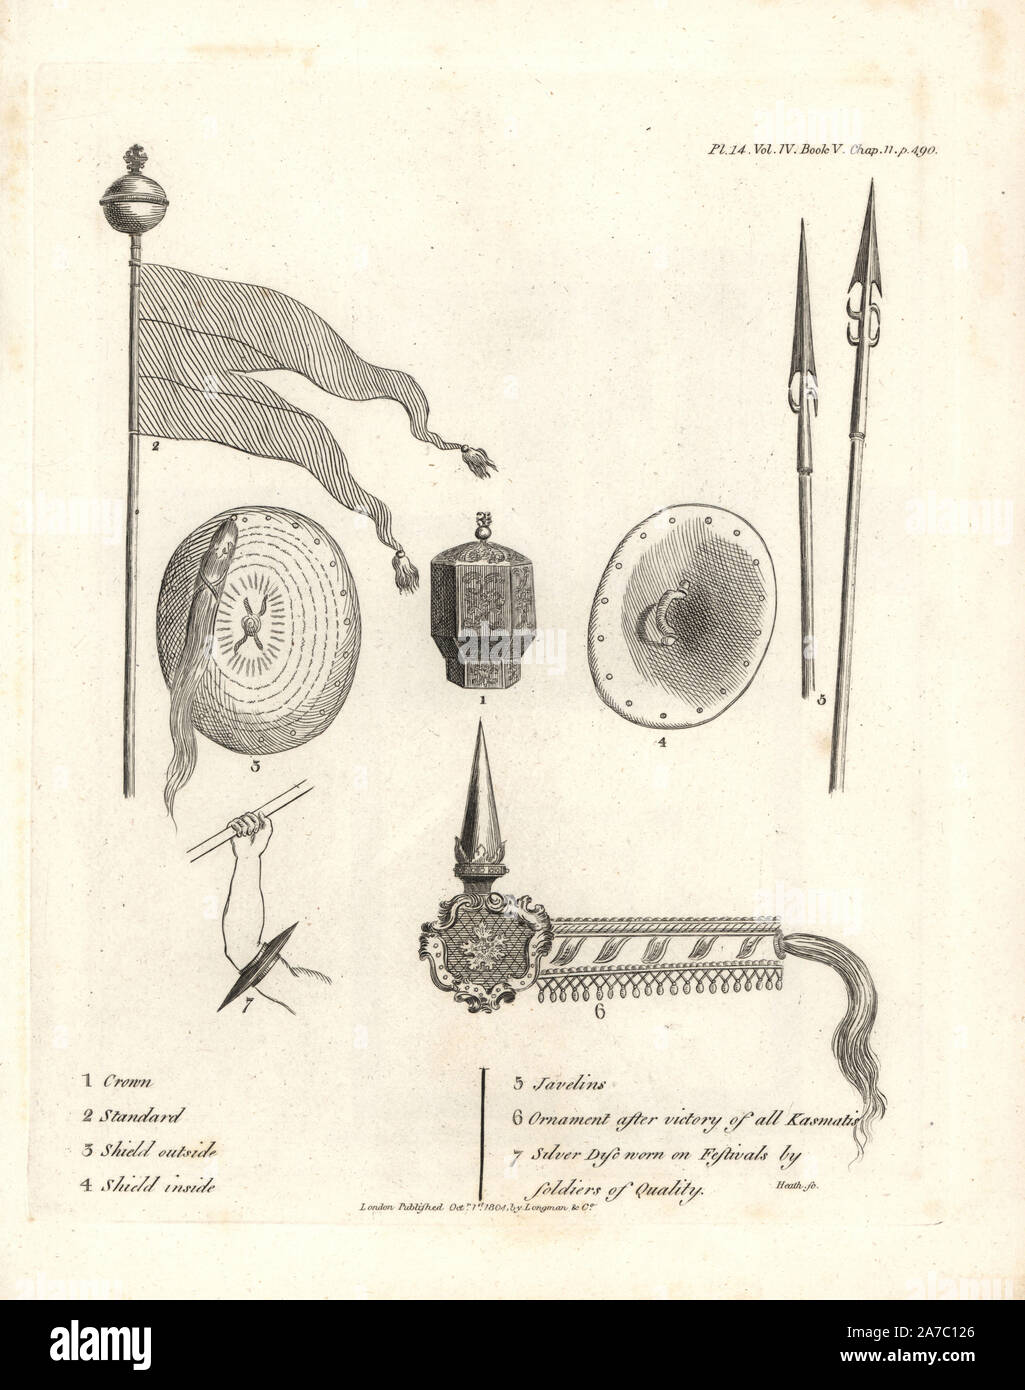 Crown and standard of Abyssinia, shields, javelins, ornaments worn on the heads and right arms of governors of provinces. Copperplate engraving from James Bruce's 'Travels to Discover the Source of the Nile, in the years 1768, 1769, 1770, 1771, 1772 and 1773,' London, 1790. James Bruce (1730-1794) was a Scottish explorer and travel writer who spent more than 12 years in North Africa and Ethiopia. Engraved by Heath after an original drawing by Bruce. Stock Photo